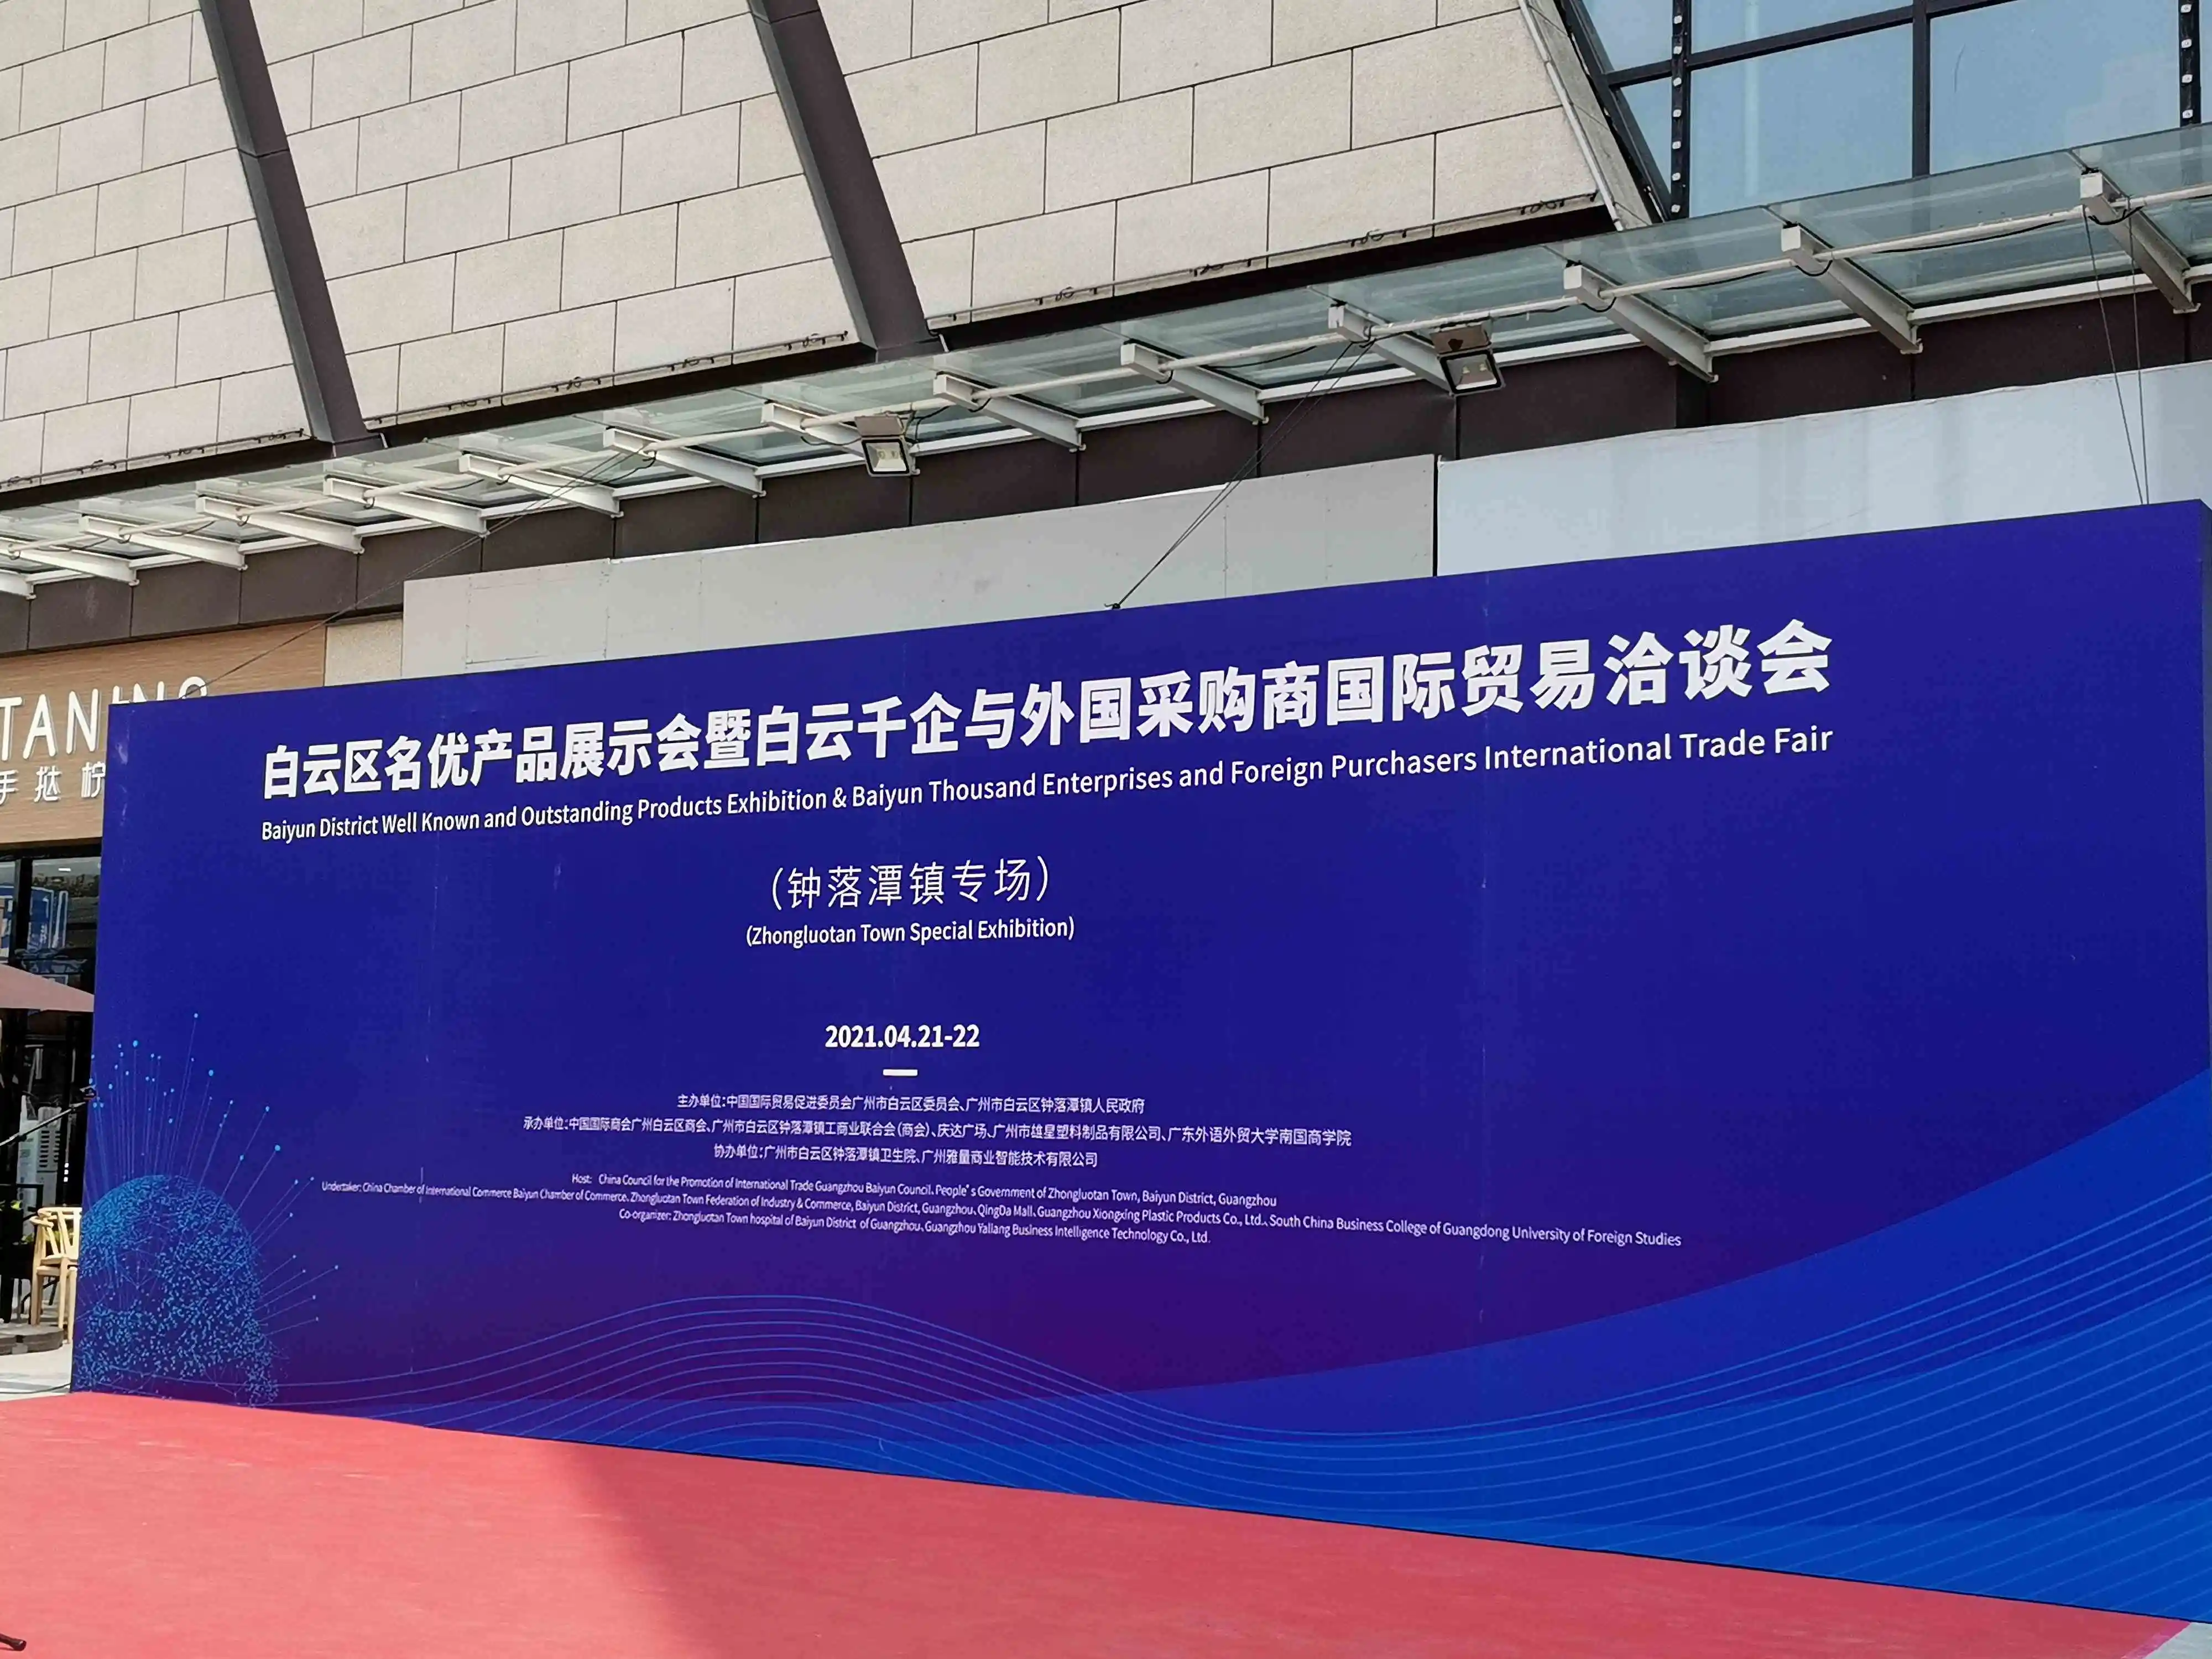 Baiyun District Well Known and Outstanding Products Exhibition&Baiyun Thousand Enterprises and Foreign Purchasers International Trade Fair--Zhongluotan Town Special Exhibition.